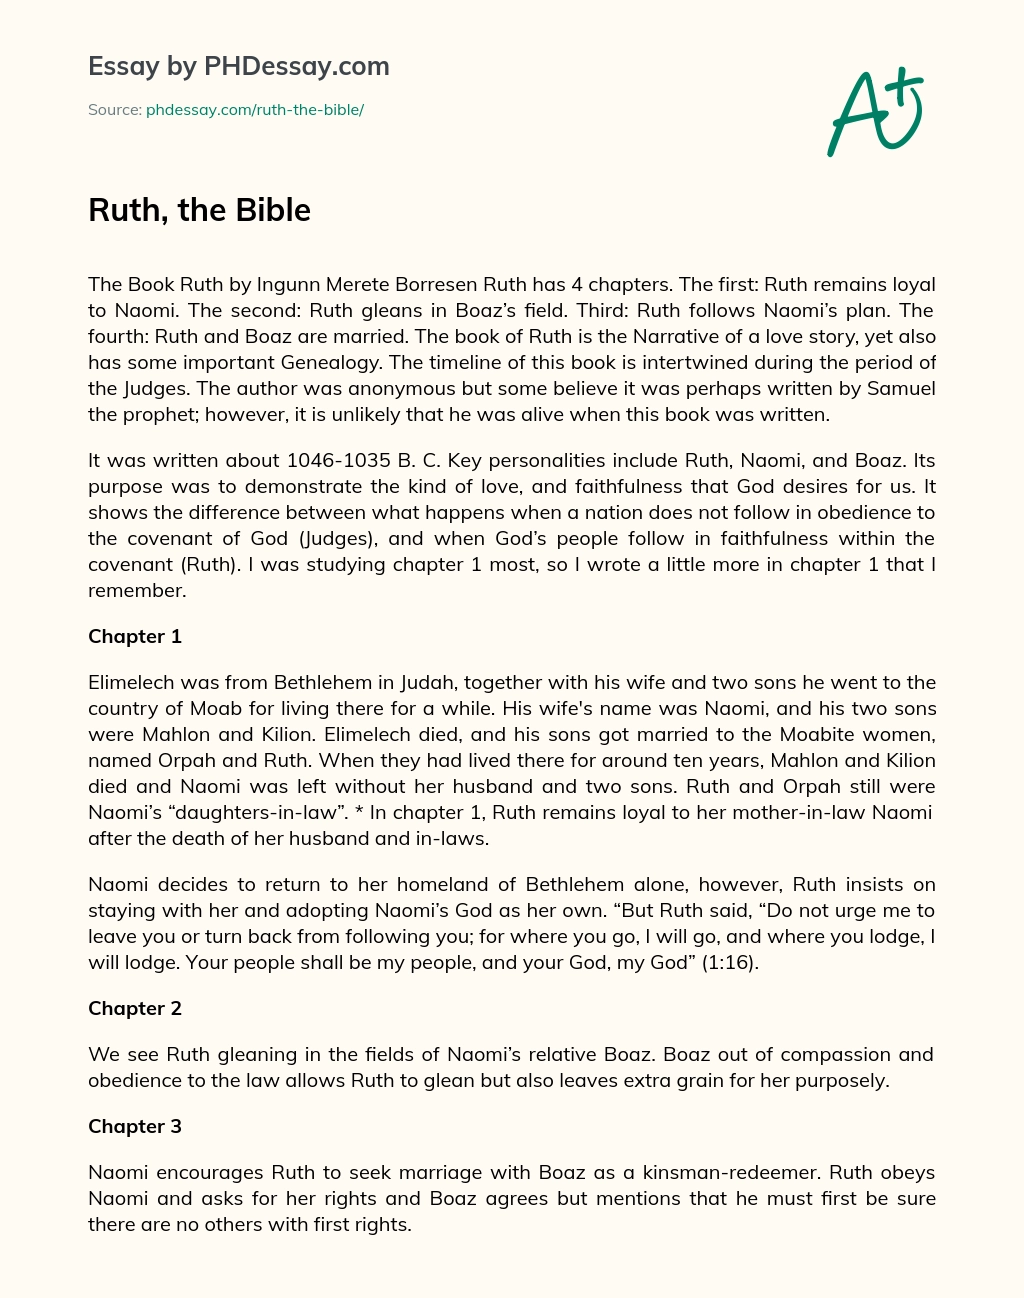 Ruth, the Bible essay